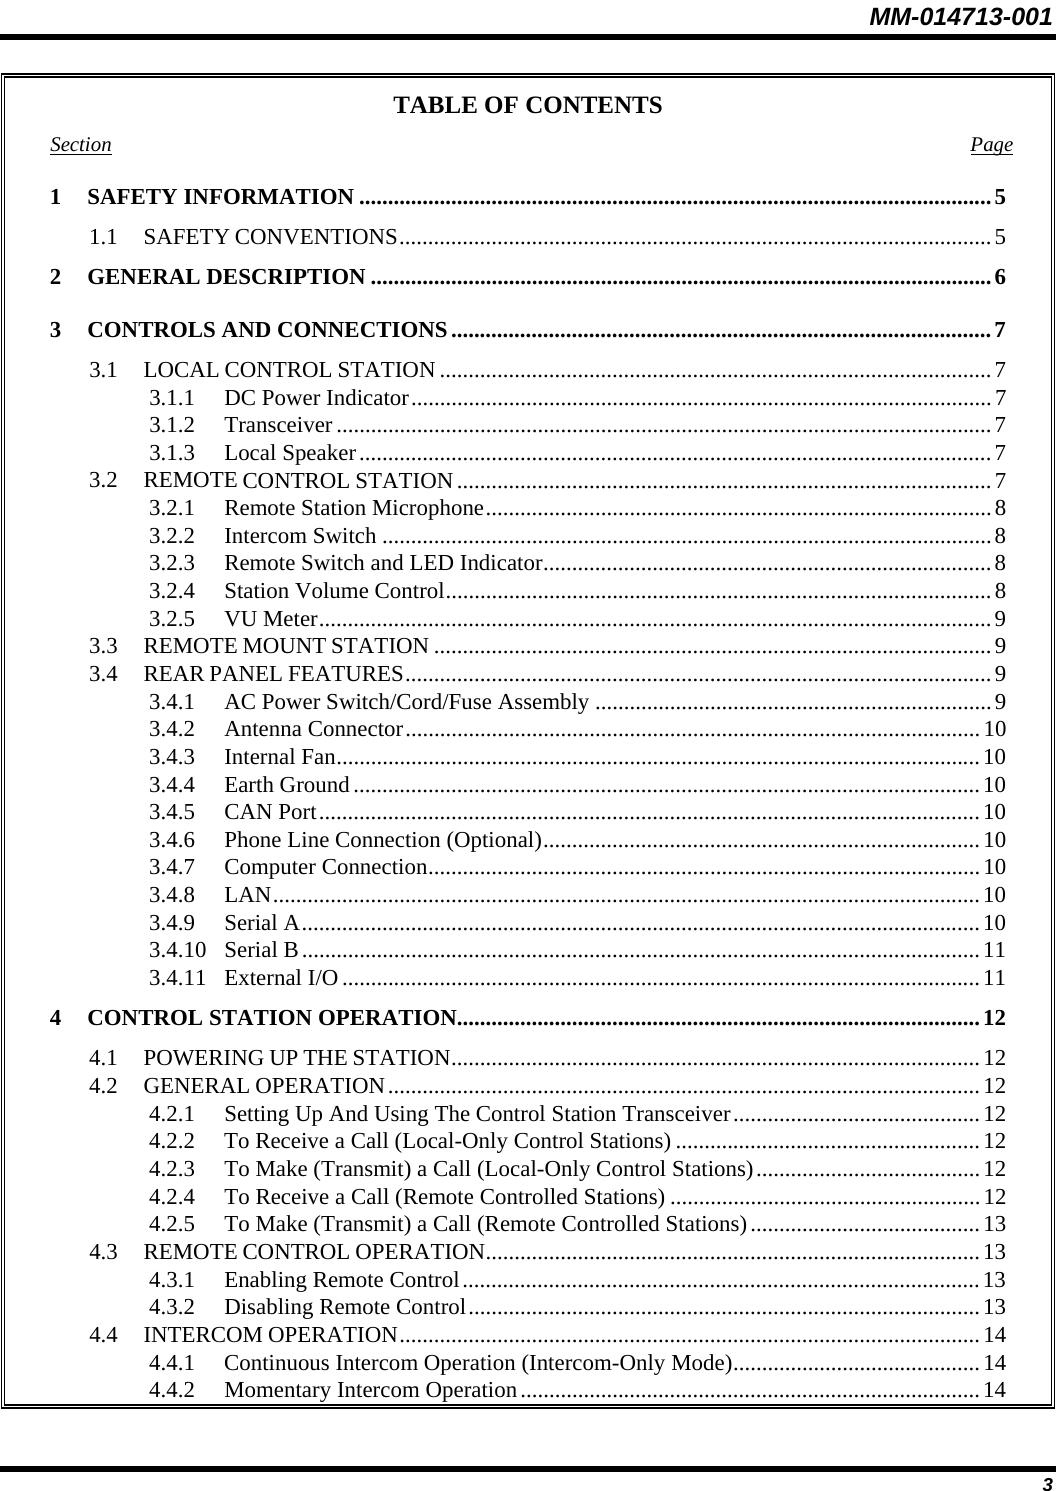 MM-014713-001  3 TABLE OF CONTENTS Section Page 1 SAFETY INFORMATION ..............................................................................................................5 1.1 SAFETY CONVENTIONS.......................................................................................................5 2 GENERAL DESCRIPTION ............................................................................................................6 3  CONTROLS AND CONNECTIONS..............................................................................................7 3.1 LOCAL CONTROL STATION ................................................................................................ 7 3.1.1  DC Power Indicator.....................................................................................................7 3.1.2 Transceiver ..................................................................................................................7 3.1.3 Local Speaker..............................................................................................................7 3.2 REMOTE CONTROL STATION .............................................................................................7 3.2.1  Remote Station Microphone........................................................................................8 3.2.2 Intercom Switch ..........................................................................................................8 3.2.3  Remote Switch and LED Indicator..............................................................................8 3.2.4  Station Volume Control...............................................................................................8 3.2.5 VU Meter..................................................................................................................... 9 3.3 REMOTE MOUNT STATION .................................................................................................9 3.4 REAR PANEL FEATURES......................................................................................................9 3.4.1  AC Power Switch/Cord/Fuse Assembly .....................................................................9 3.4.2 Antenna Connector....................................................................................................10 3.4.3 Internal Fan................................................................................................................10 3.4.4 Earth Ground .............................................................................................................10 3.4.5 CAN Port...................................................................................................................10 3.4.6  Phone Line Connection (Optional)............................................................................10 3.4.7 Computer Connection................................................................................................10 3.4.8 LAN...........................................................................................................................10 3.4.9 Serial A......................................................................................................................10 3.4.10 Serial B......................................................................................................................11 3.4.11 External I/O ...............................................................................................................11 4  CONTROL STATION OPERATION...........................................................................................12 4.1 POWERING UP THE STATION............................................................................................12 4.2 GENERAL OPERATION.......................................................................................................12 4.2.1  Setting Up And Using The Control Station Transceiver........................................... 12 4.2.2  To Receive a Call (Local-Only Control Stations) .....................................................12 4.2.3  To Make (Transmit) a Call (Local-Only Control Stations).......................................12 4.2.4  To Receive a Call (Remote Controlled Stations) ......................................................12 4.2.5  To Make (Transmit) a Call (Remote Controlled Stations)........................................13 4.3 REMOTE CONTROL OPERATION......................................................................................13 4.3.1  Enabling Remote Control.......................................................................................... 13 4.3.2  Disabling Remote Control.........................................................................................13 4.4 INTERCOM OPERATION.....................................................................................................14 4.4.1  Continuous Intercom Operation (Intercom-Only Mode)........................................... 14 4.4.2  Momentary Intercom Operation................................................................................14 